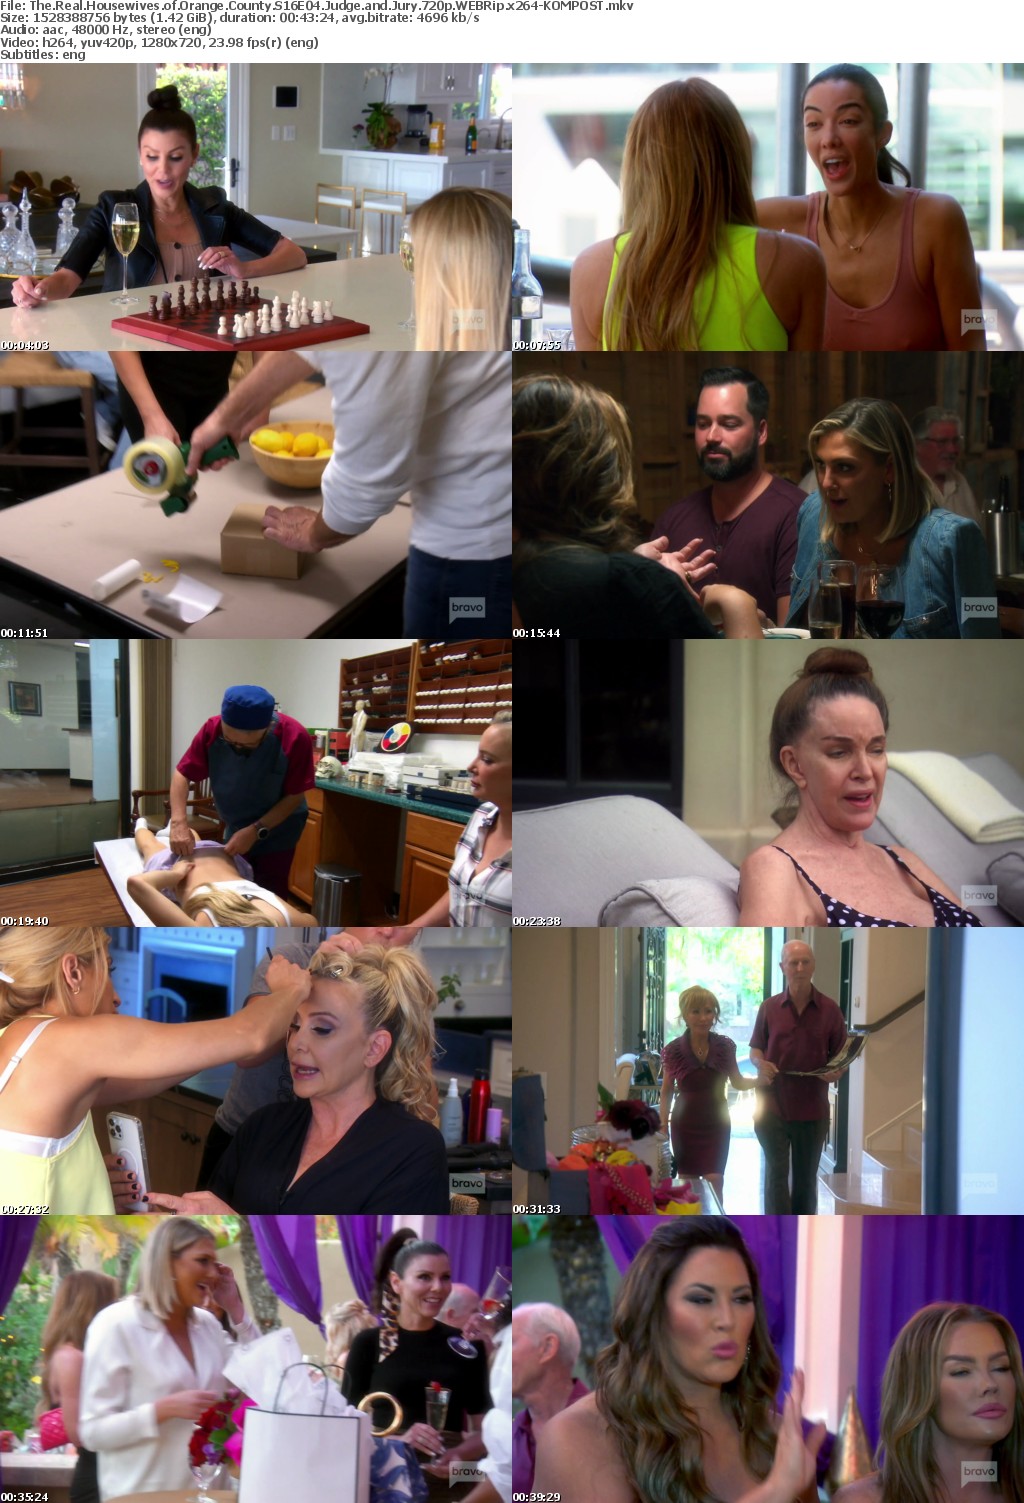 The Real Housewives of Orange County S16E04 Judge and Jury 720p WEBRip x264-KOMPOST